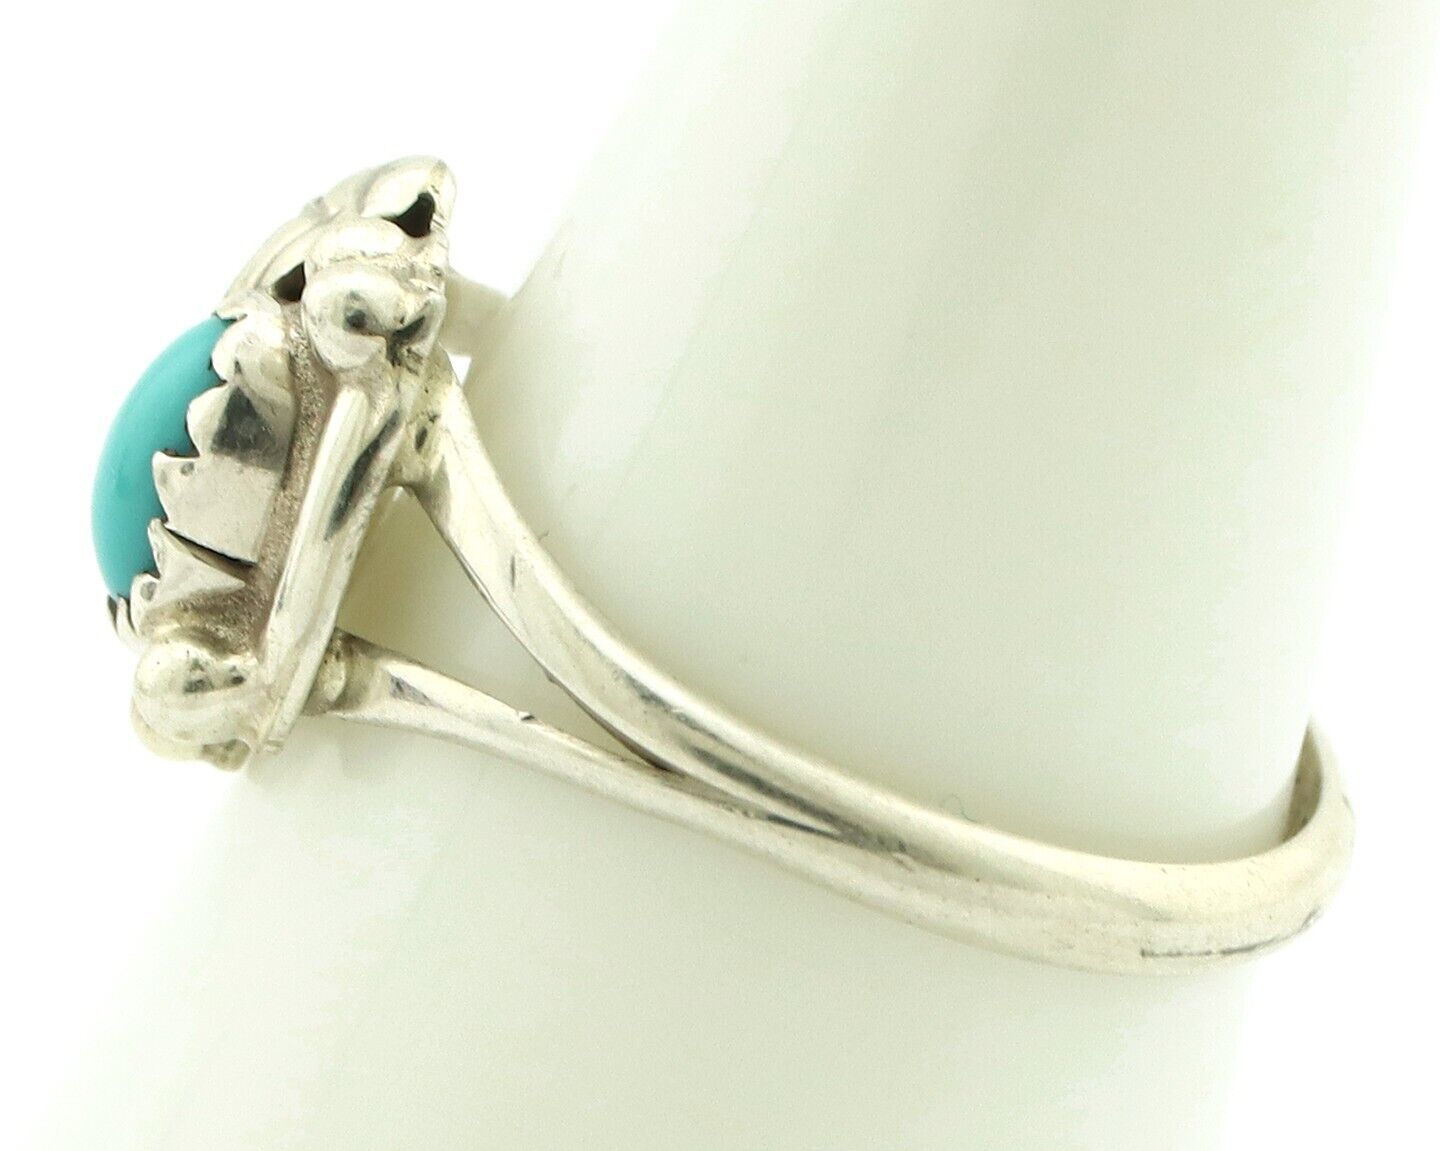 Navajo Ring .925 Silver Natural Blue Turquoise Artist Signed DT C.80's